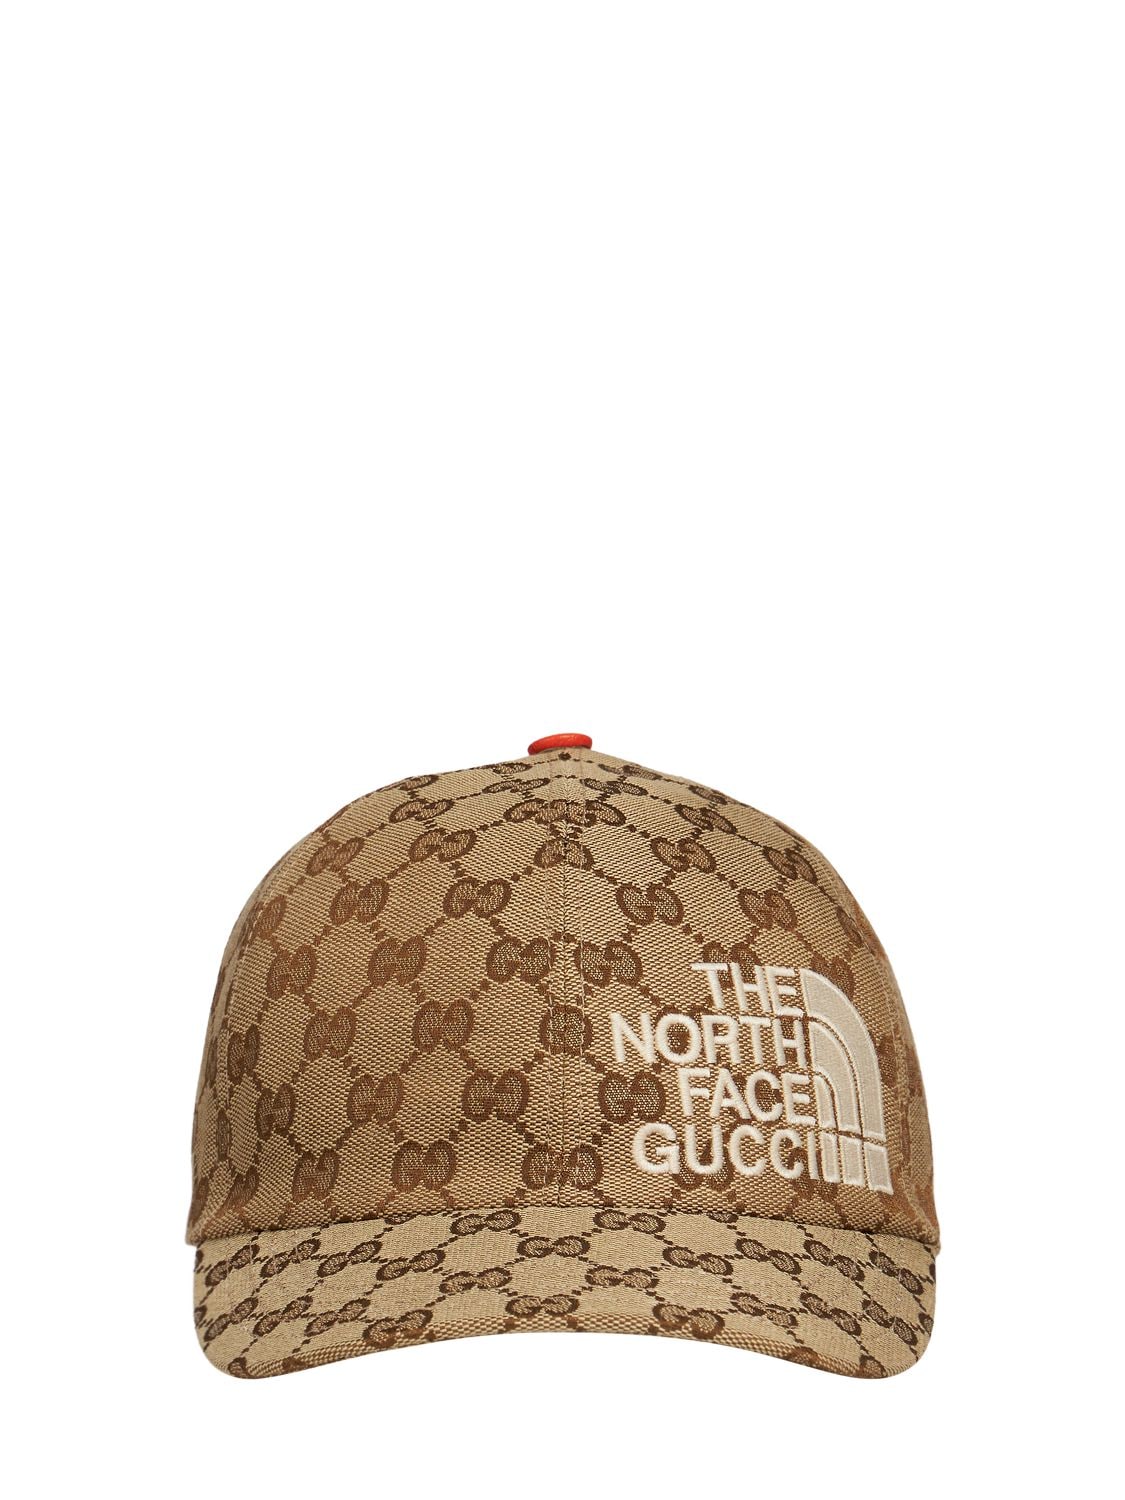 GUCCI X THE NORTH FACE GG帆布棒球帽,75IGZF018-OTC3NG2